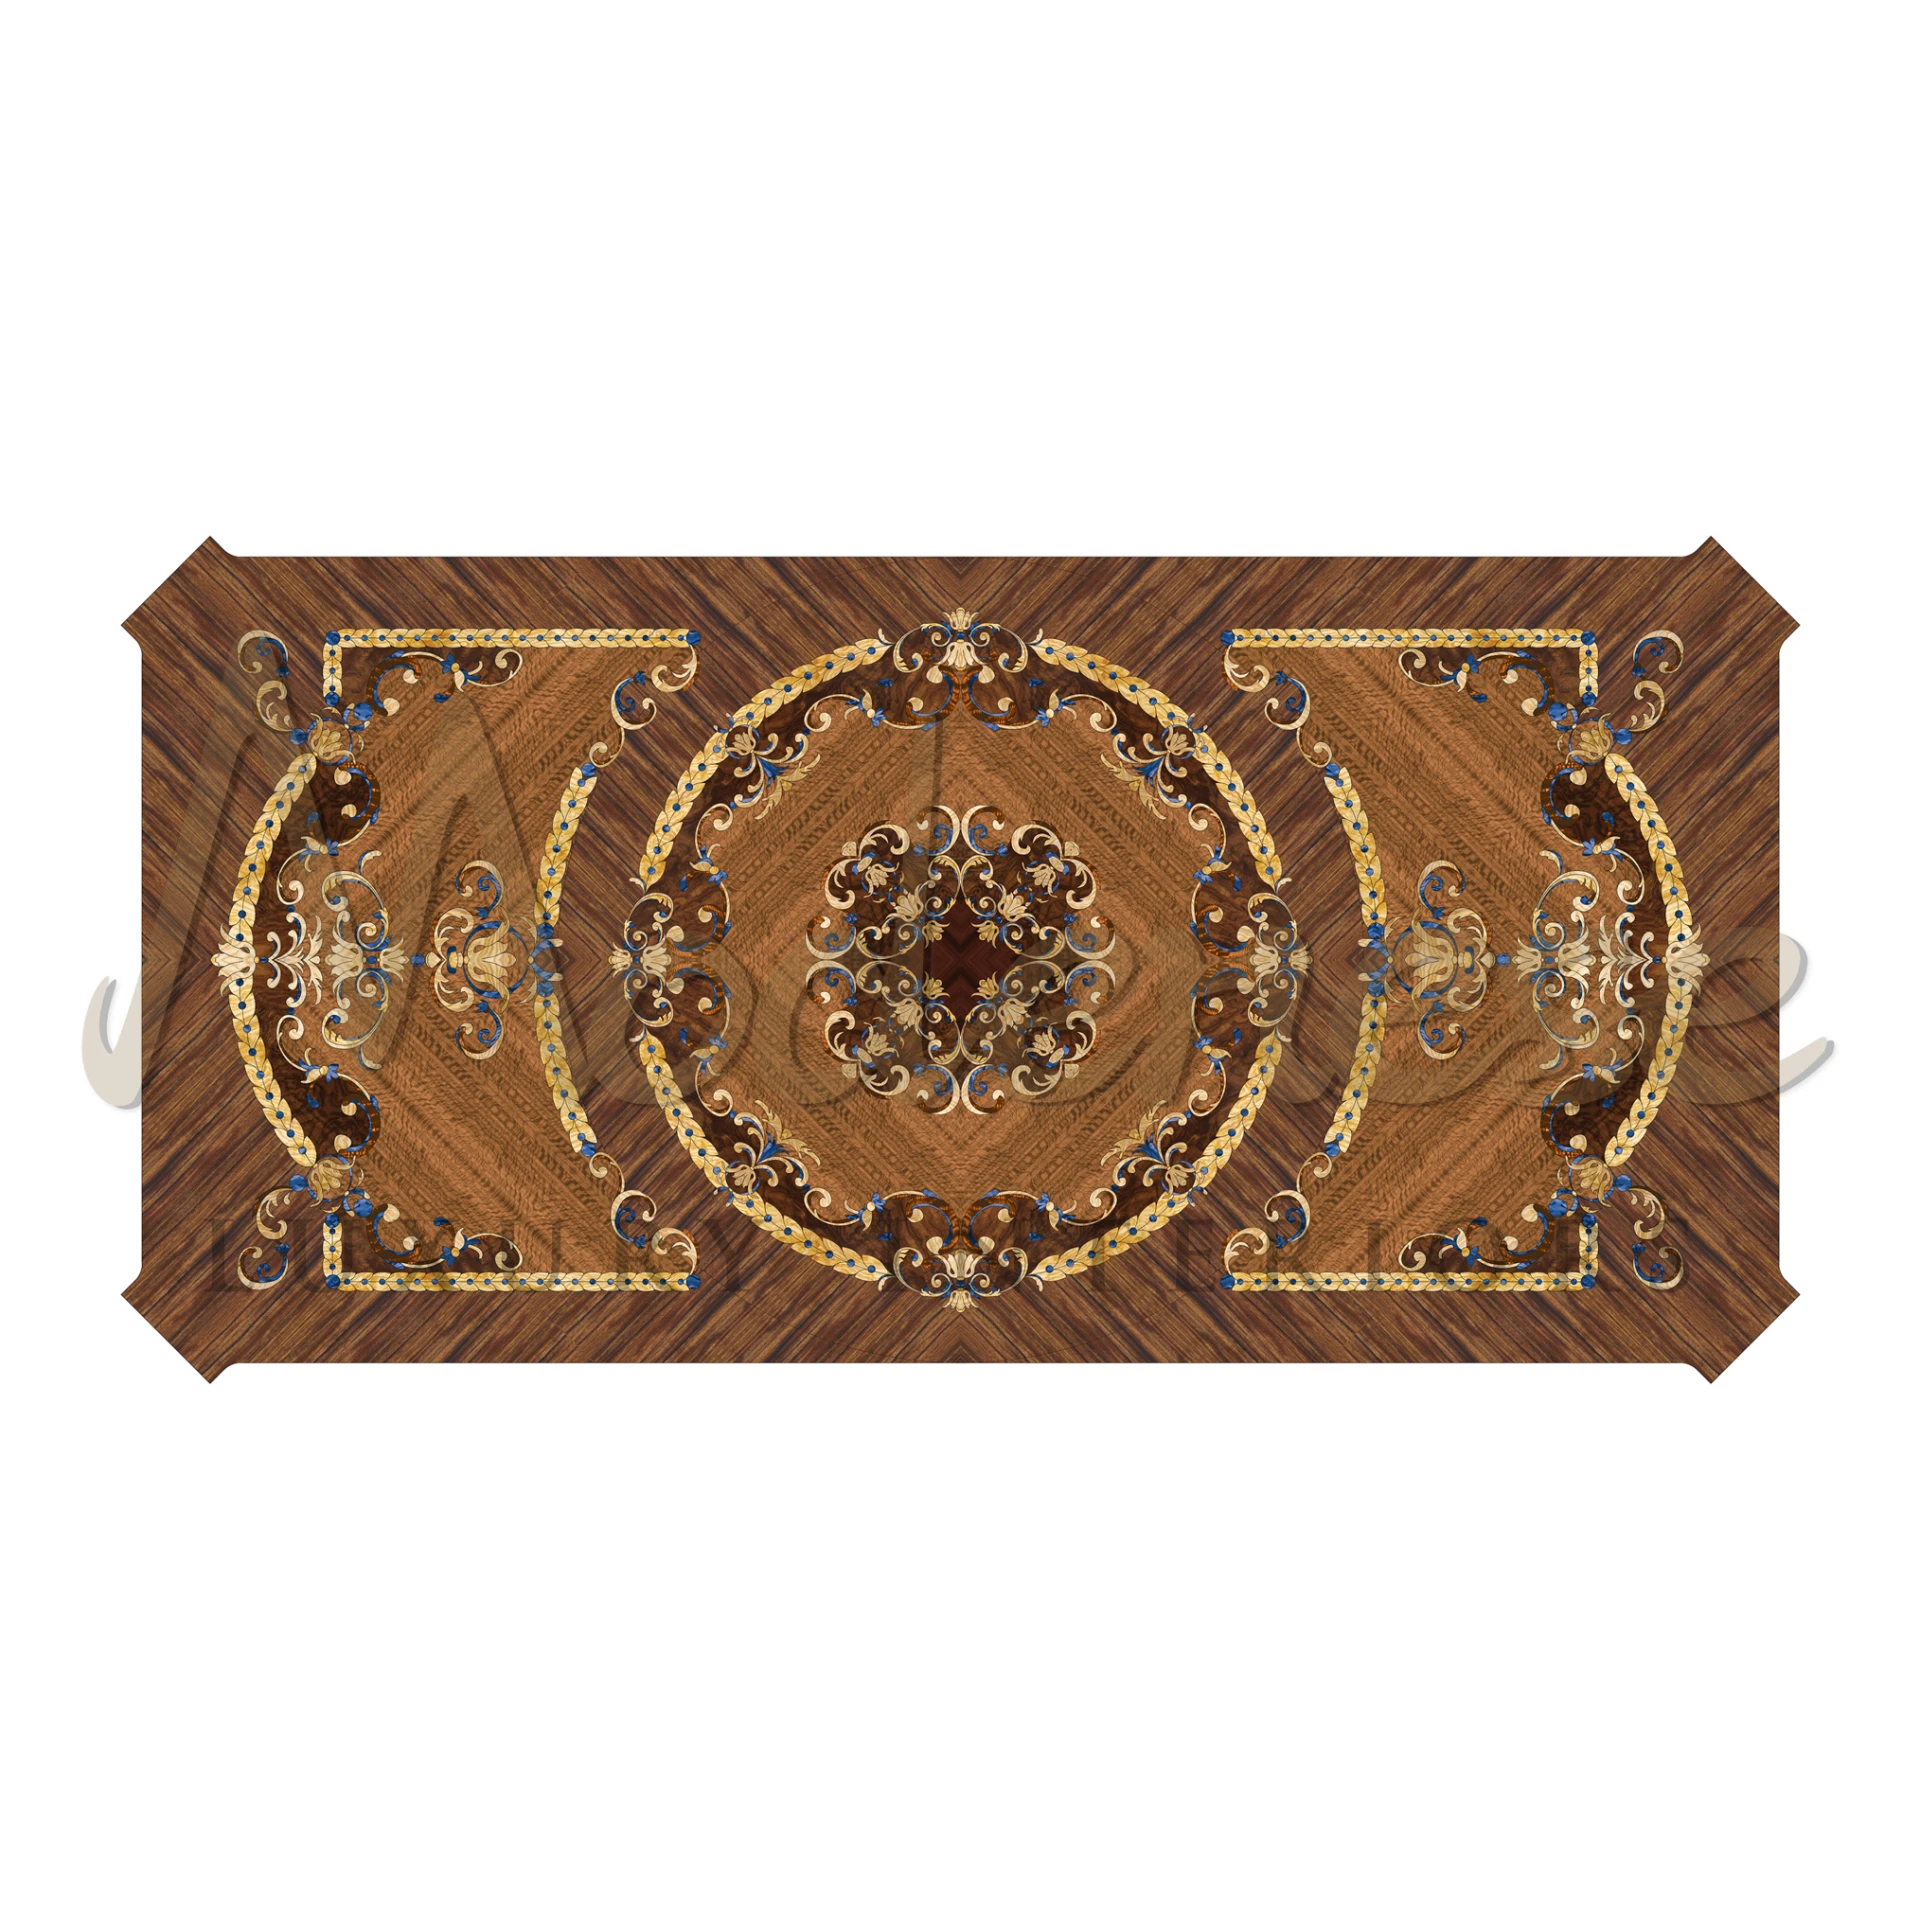 Transform your living room into a sanctuary of style with our Rectangular Wood Marquetry Coffee Table.